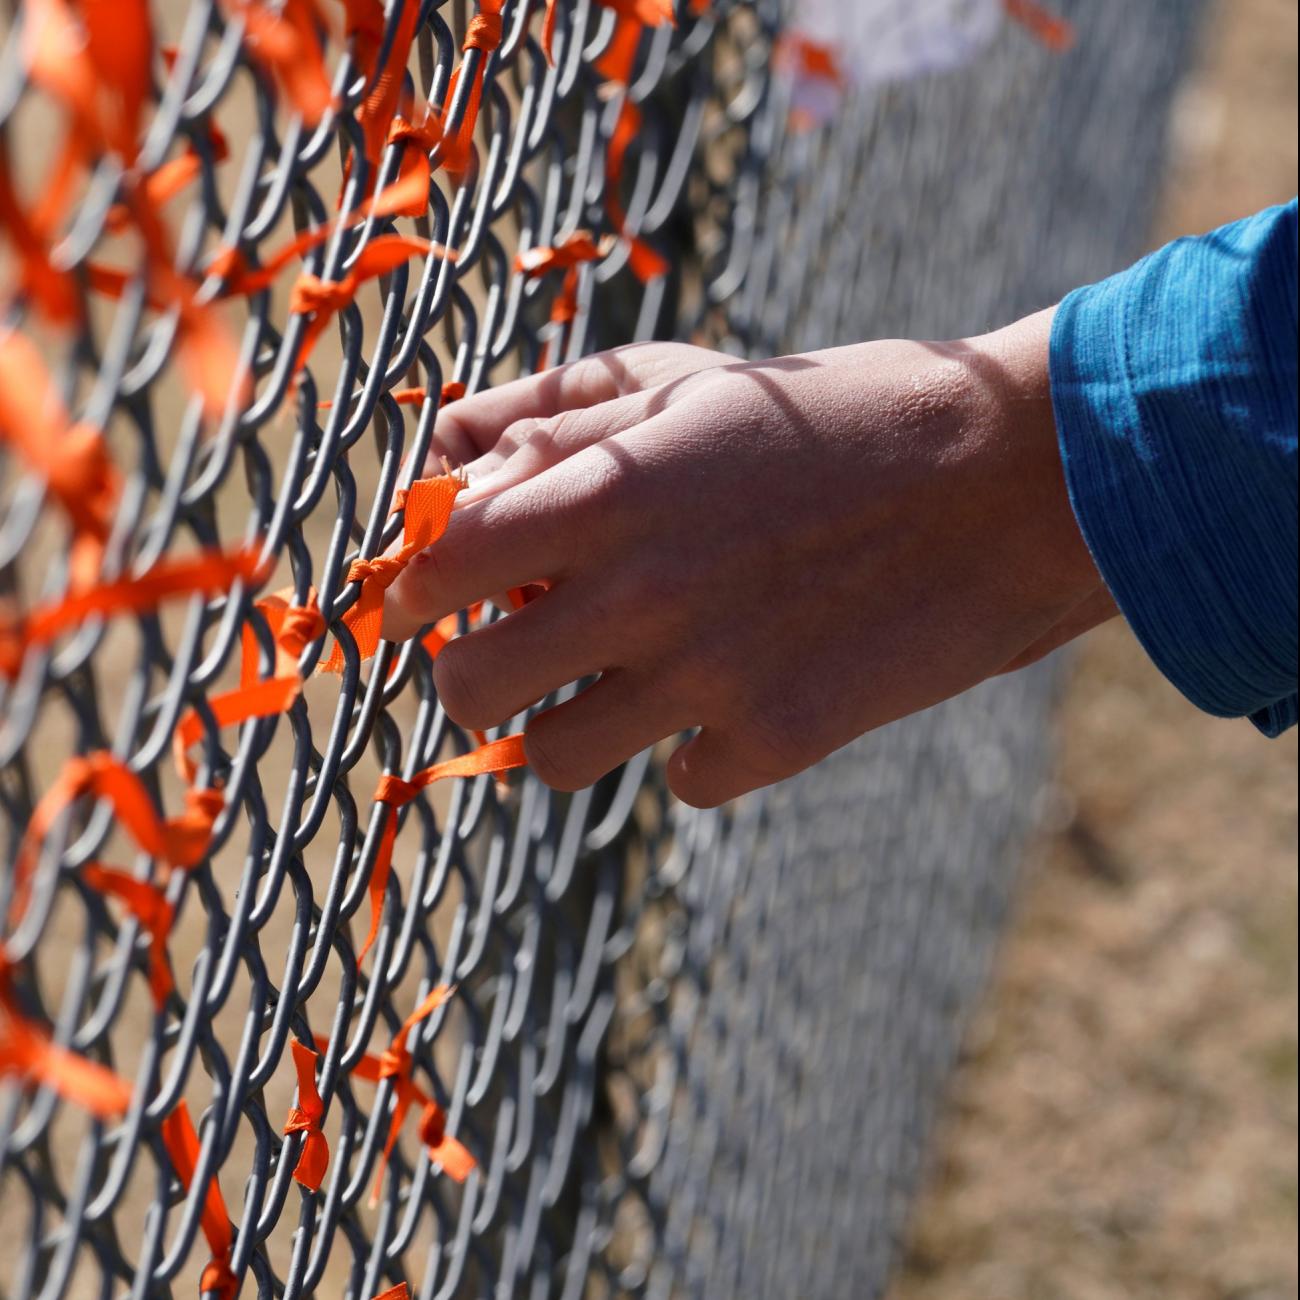 A white hand with the cuff of a blue jacket reaches out to tie an orange ribbon onto a chain-link fence covered in orange ribbons in honor of those killed by gun violence